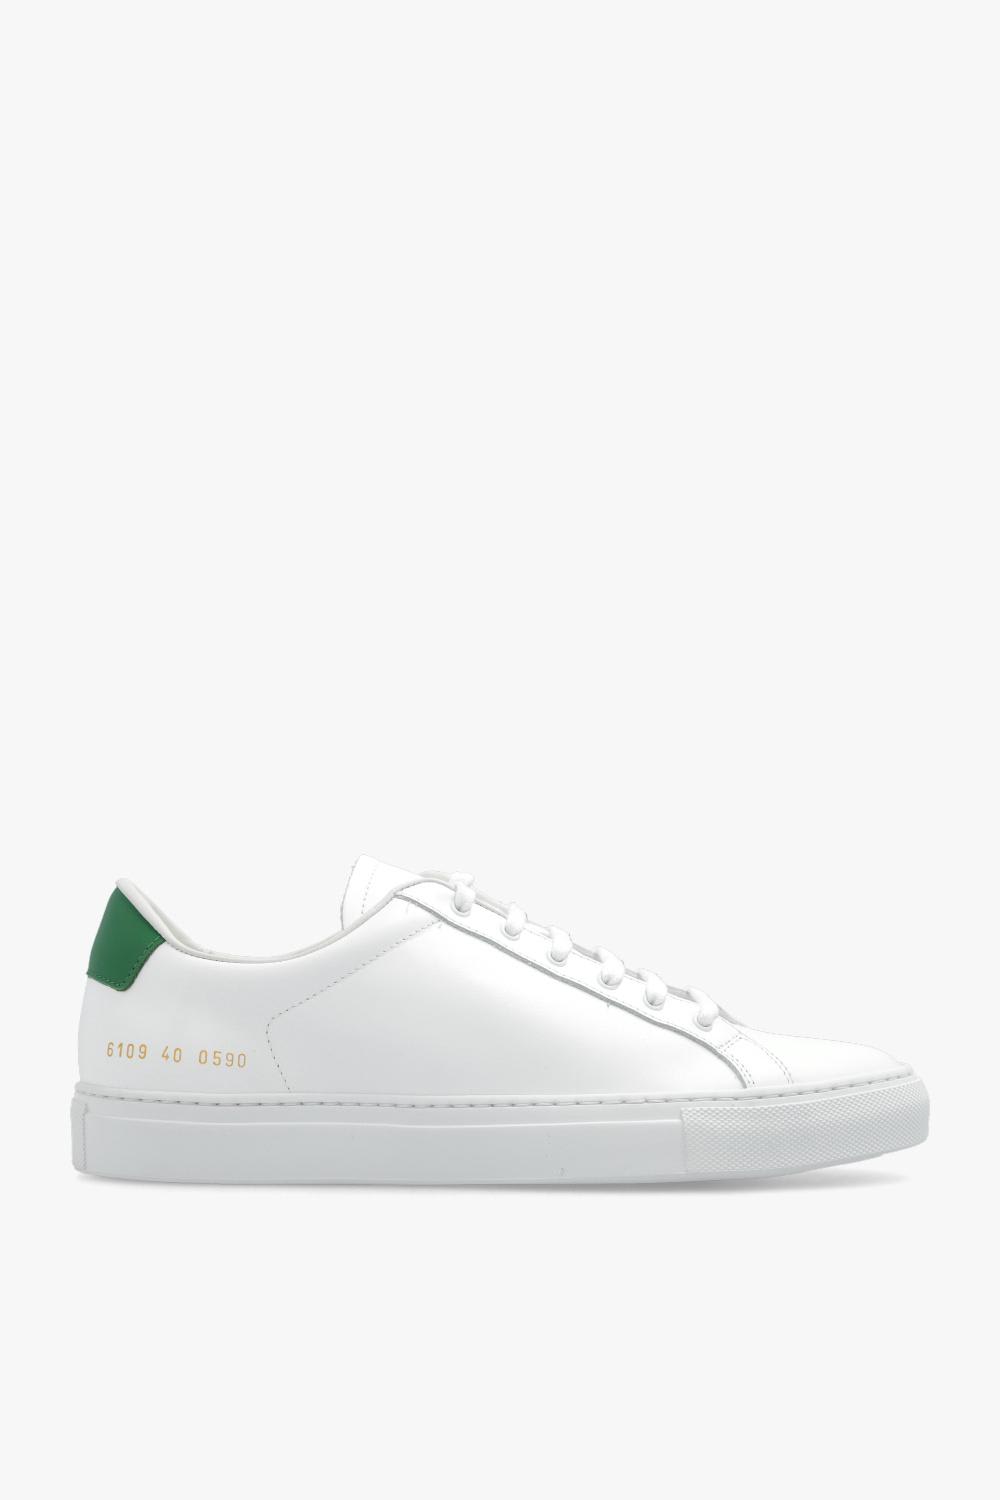 COMMON PROJECTS RETRO LOW SNEAKERS